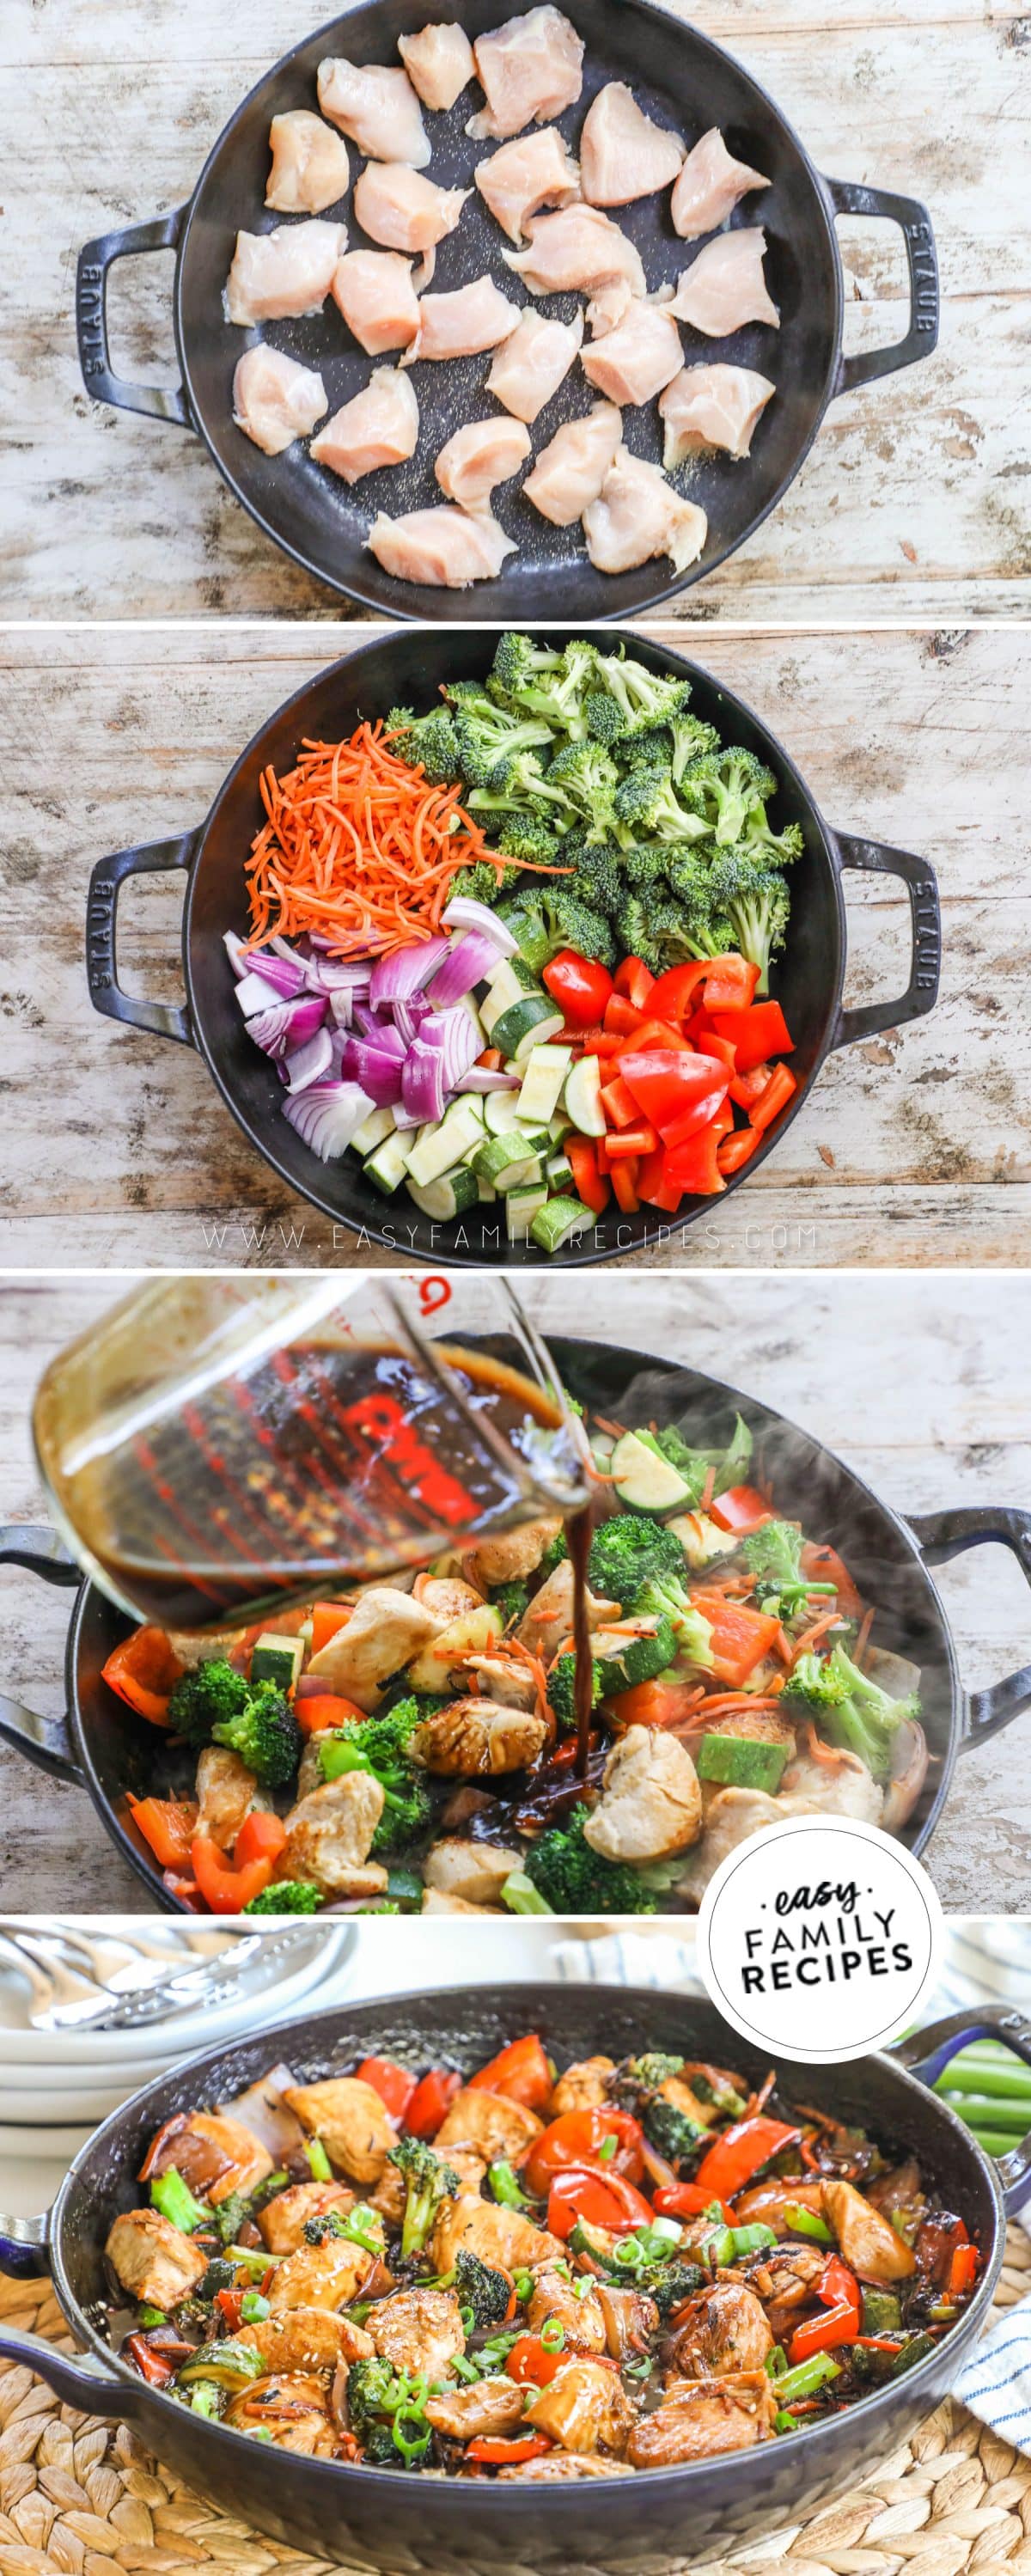 How to make chicken and vegetable stir fry: 1) cook the chicken, 2) cook the vegetables, 3) add the sauce, 4) stir together